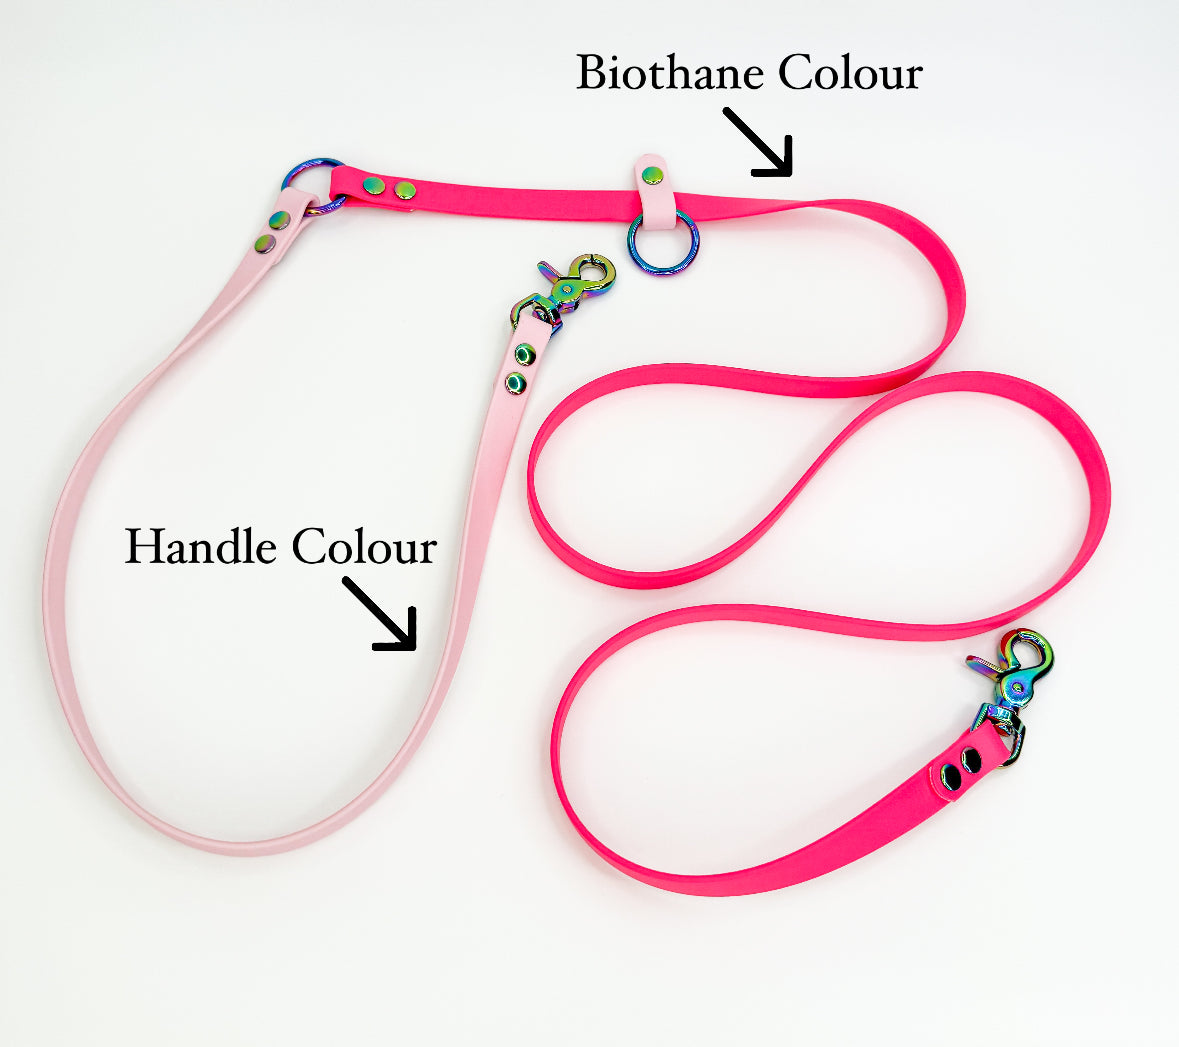 Hands free/Handle BioThane Lead *Design your own*